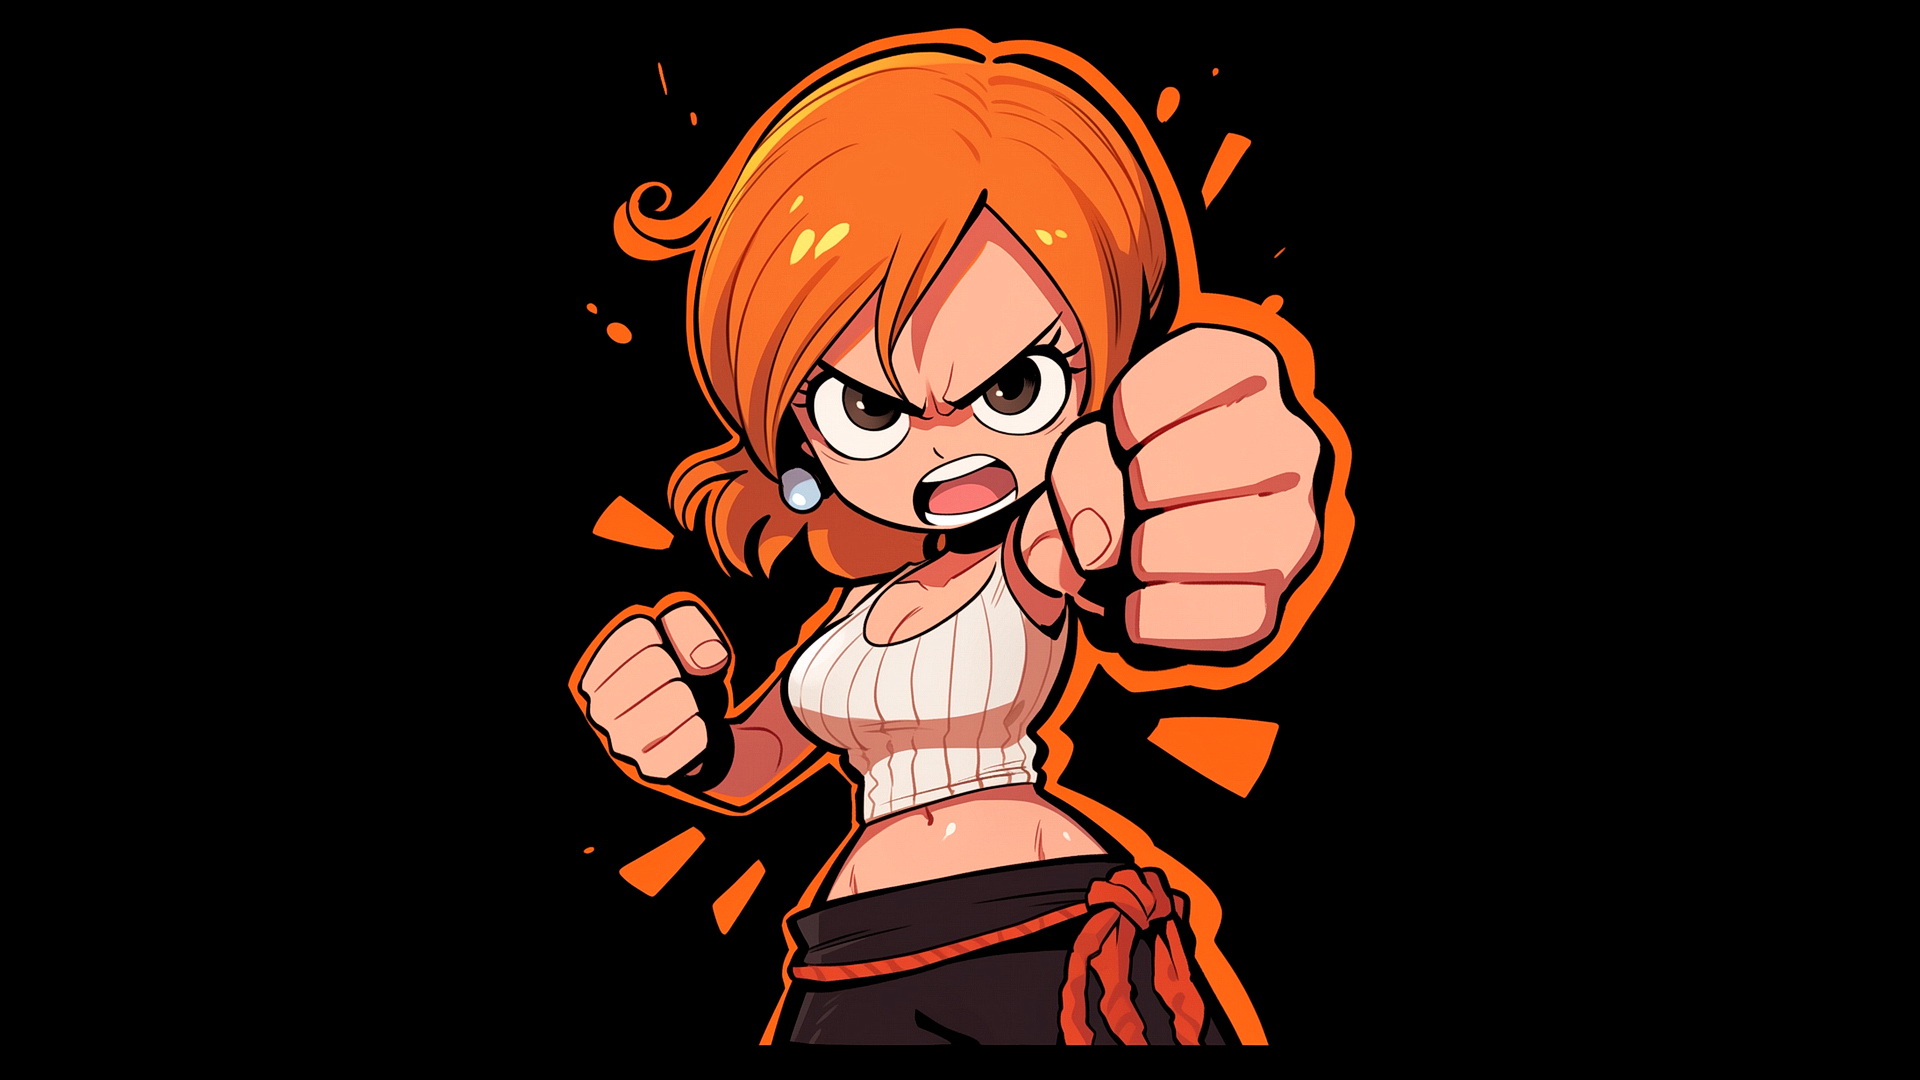 A drawing of a girl fighter on a black background